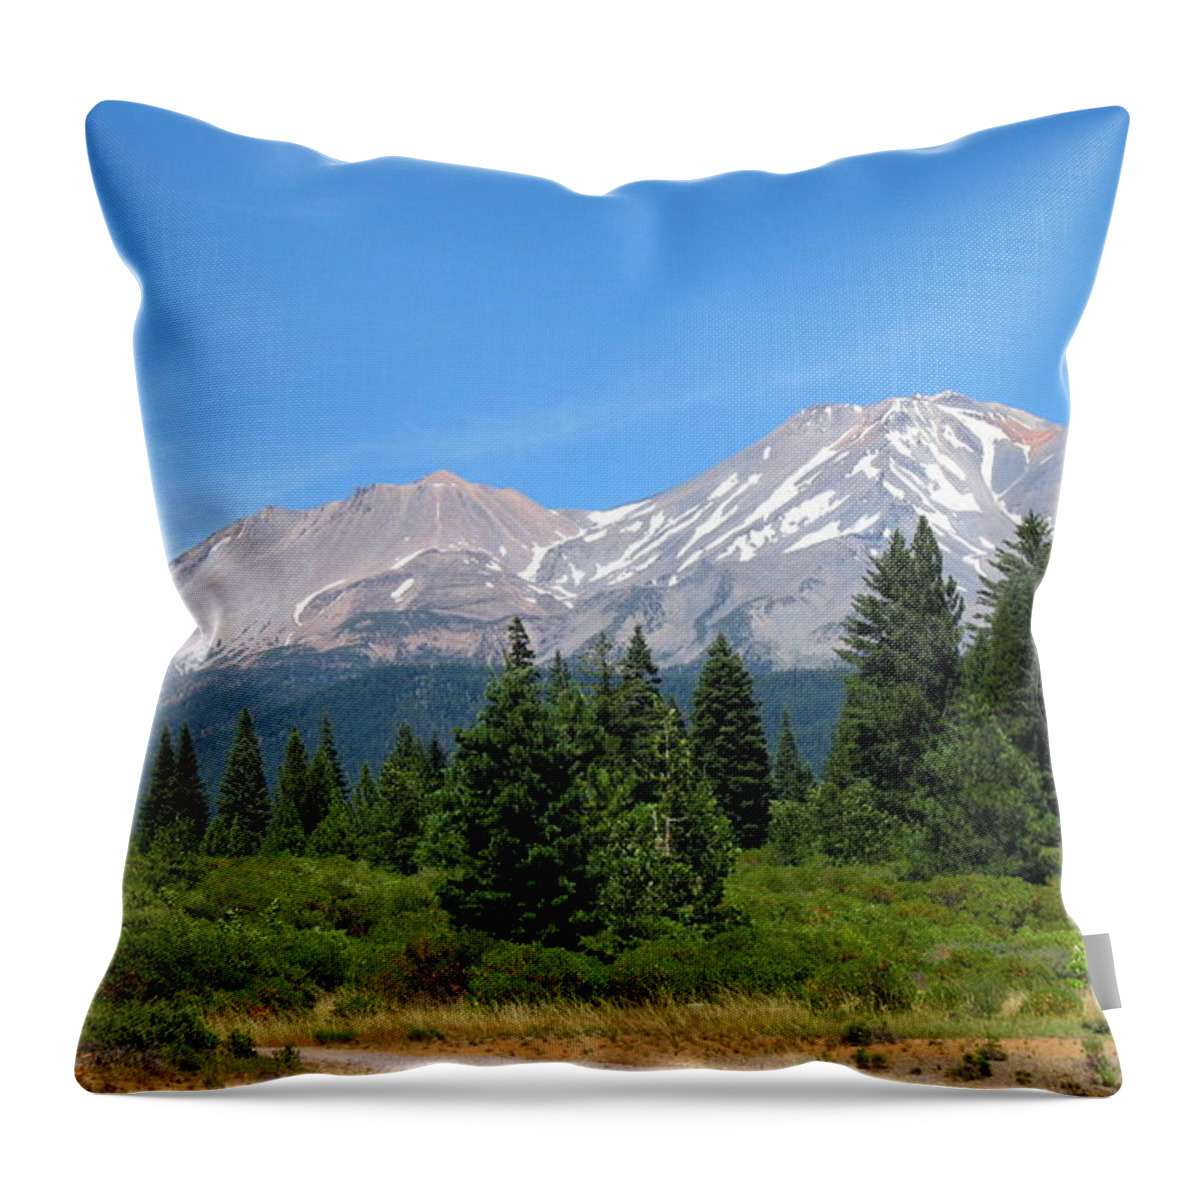 Mount Shasta Throw Pillow featuring the photograph Mount Shasta Ca 07 15 07 by Joyce Dickens